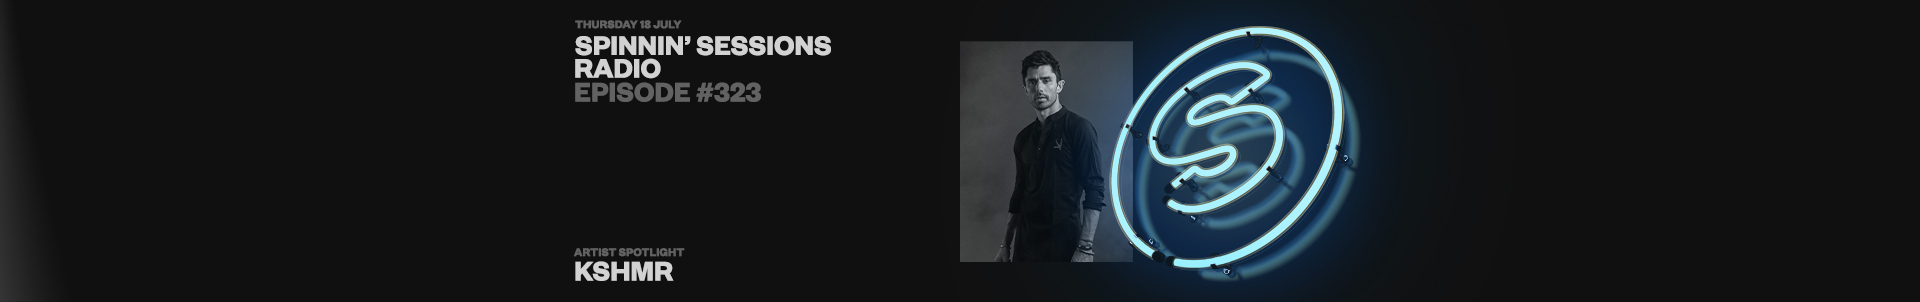 Check out a brand new episode of Spinnin' Sessions feat. KSHMR